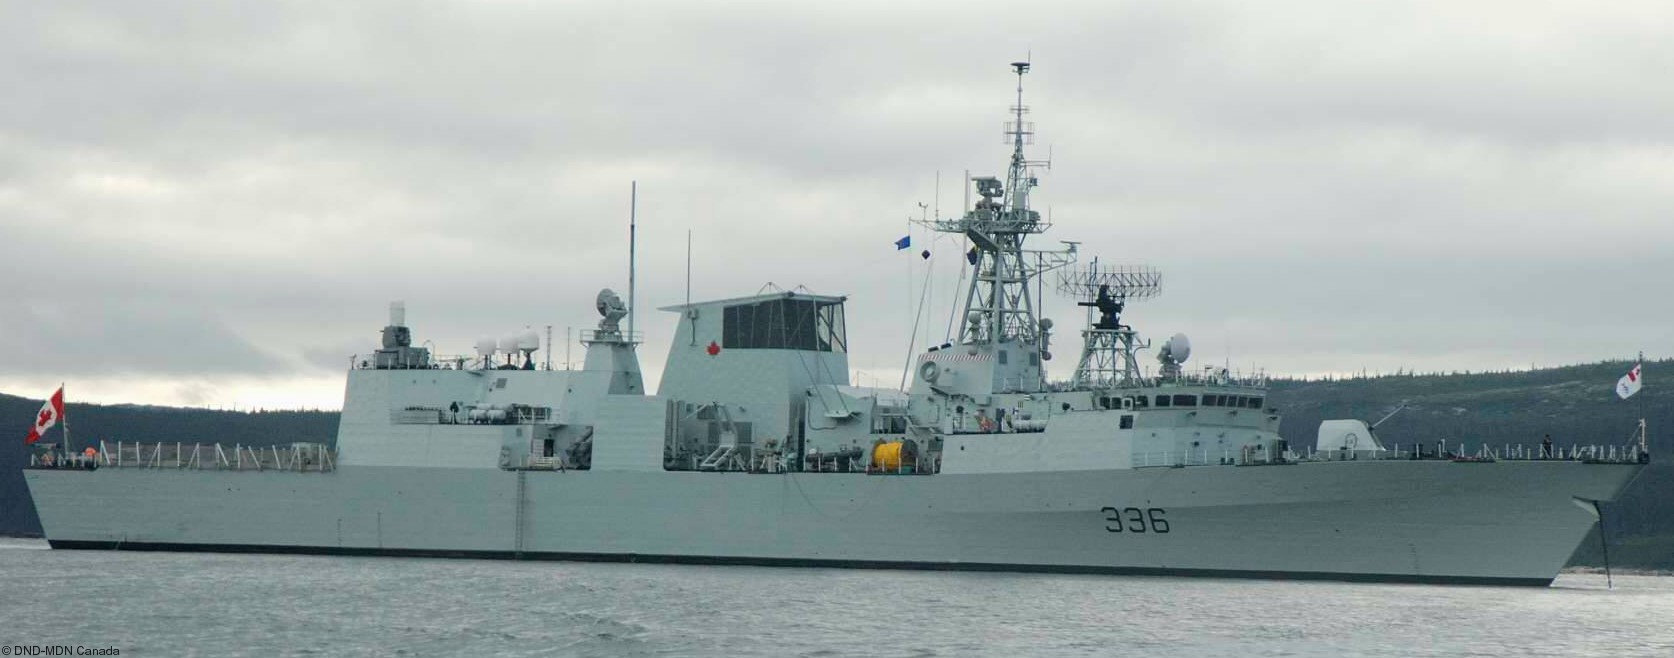 ffh-336 hmcs montreal halifax class helicopter patrol frigate ncsm royal canadian navy 35